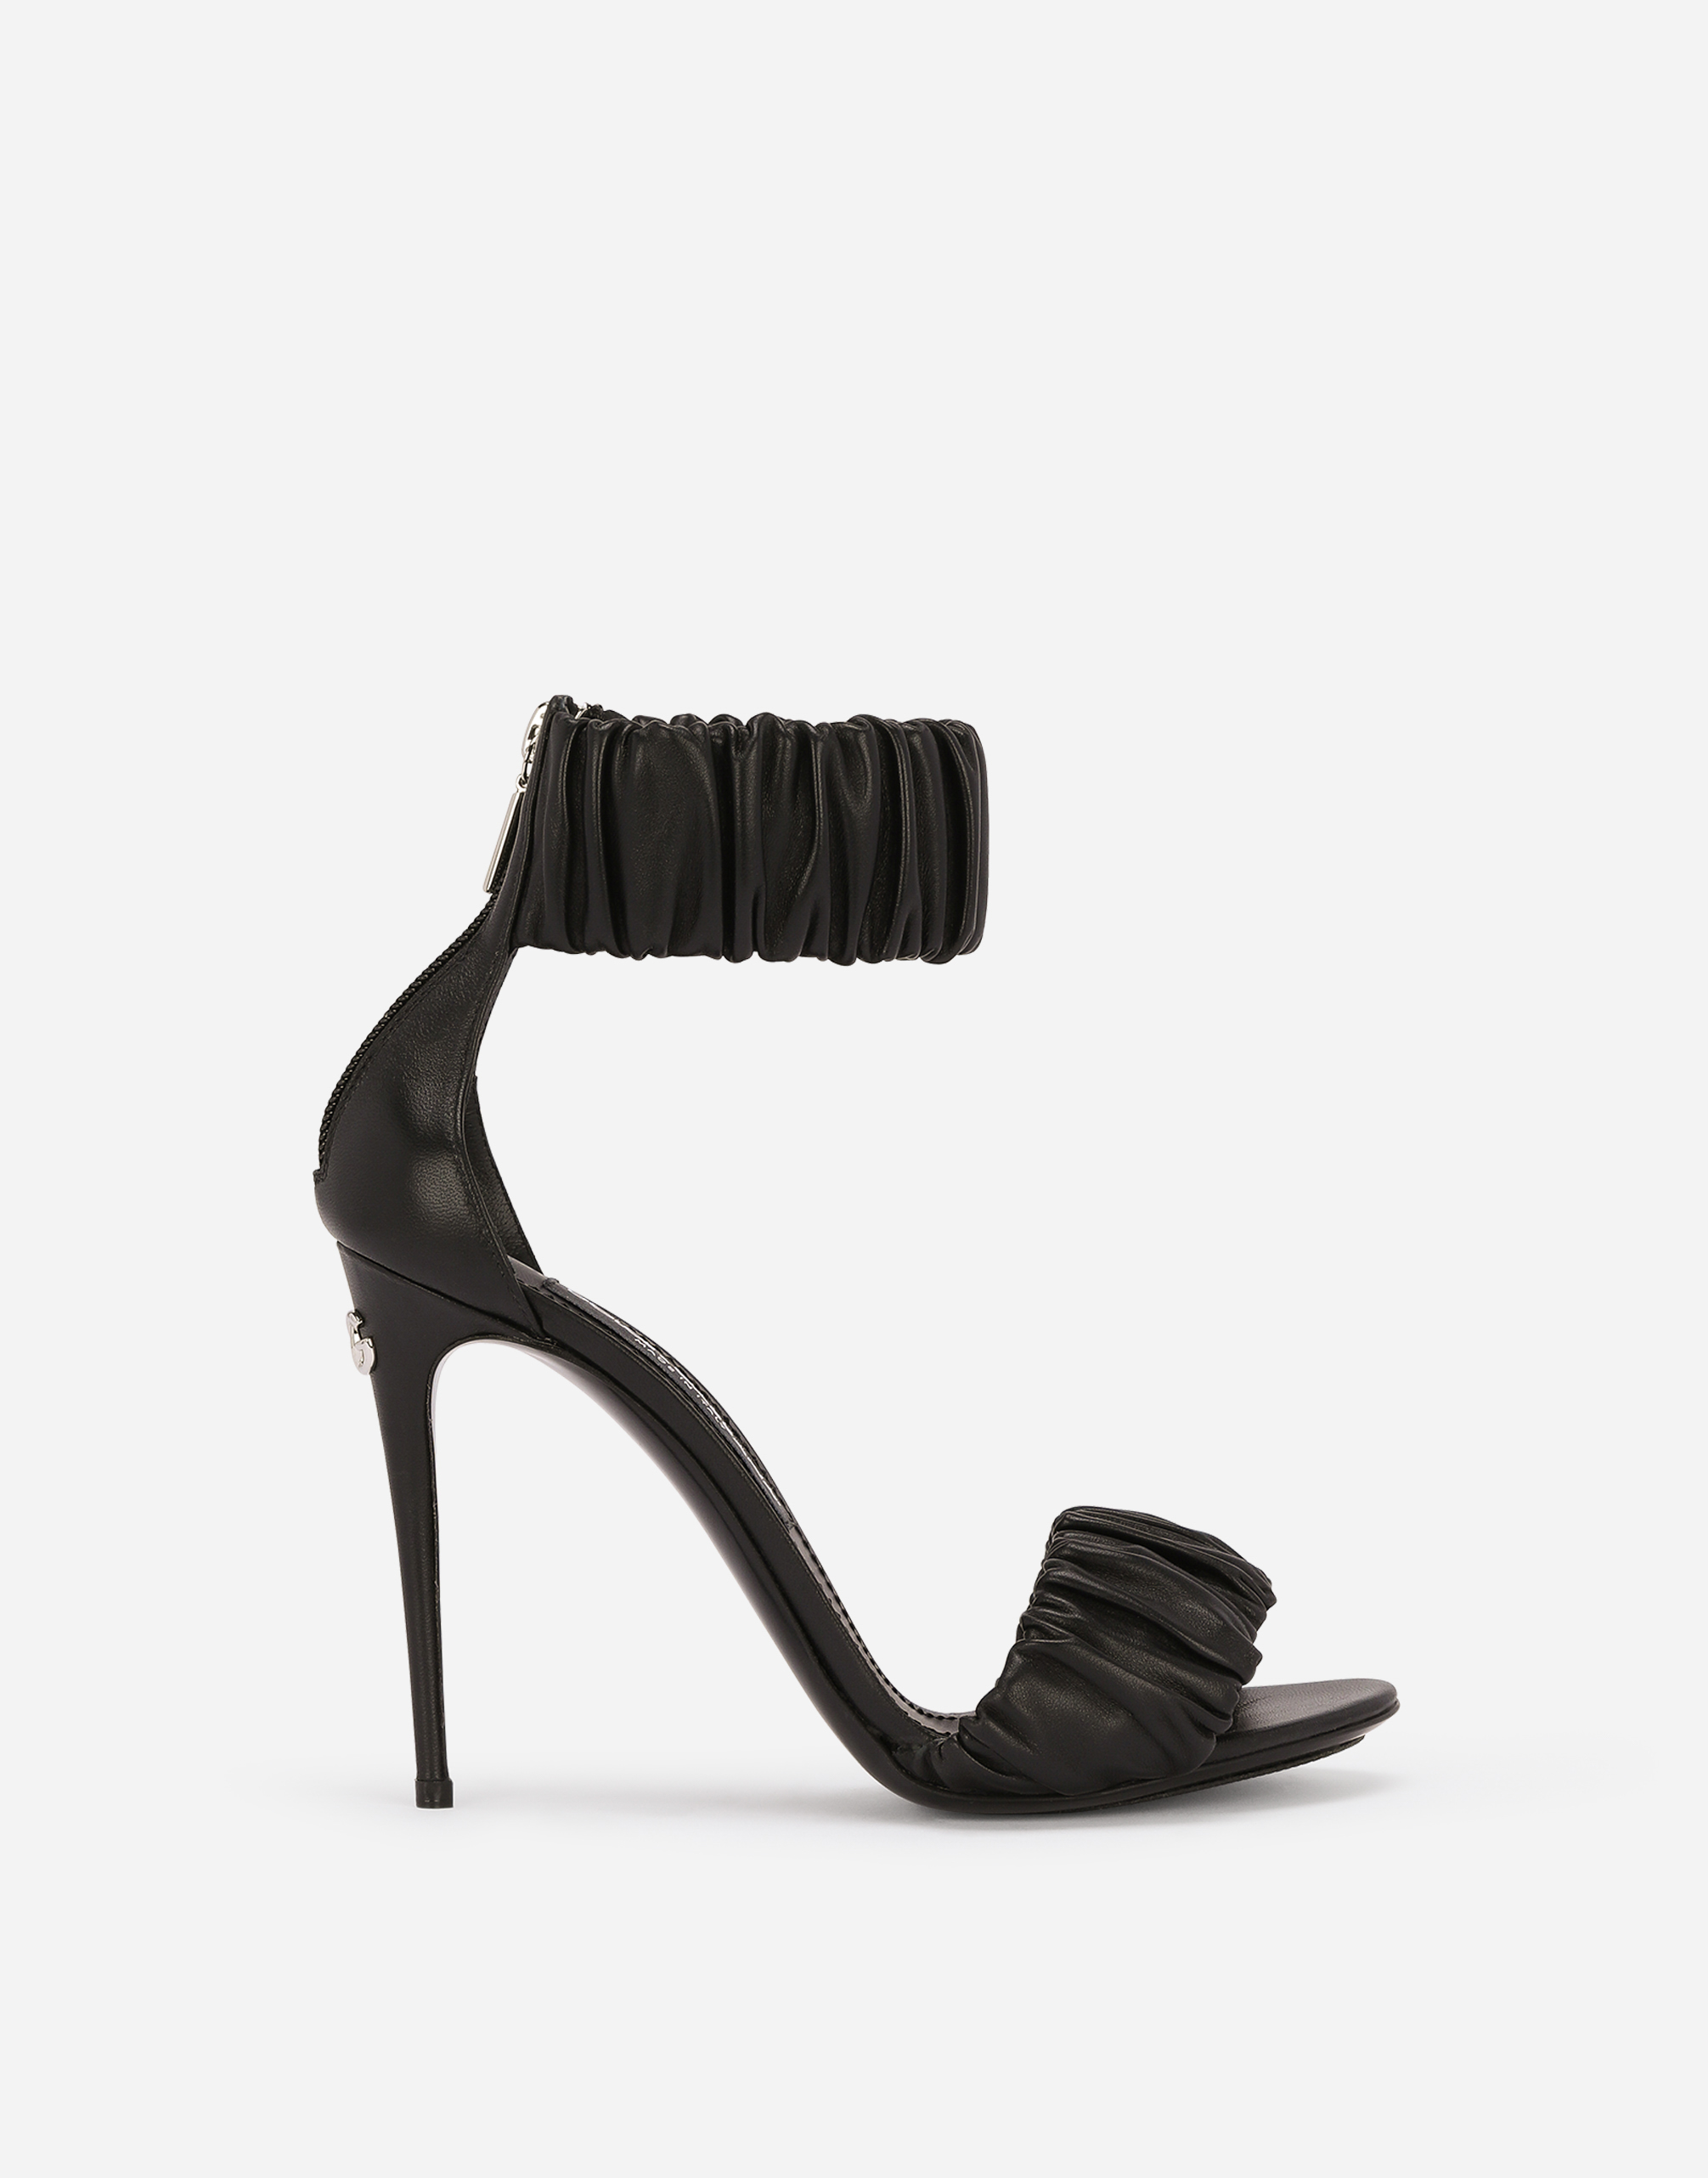 Gathered nappa leather sandals in Black